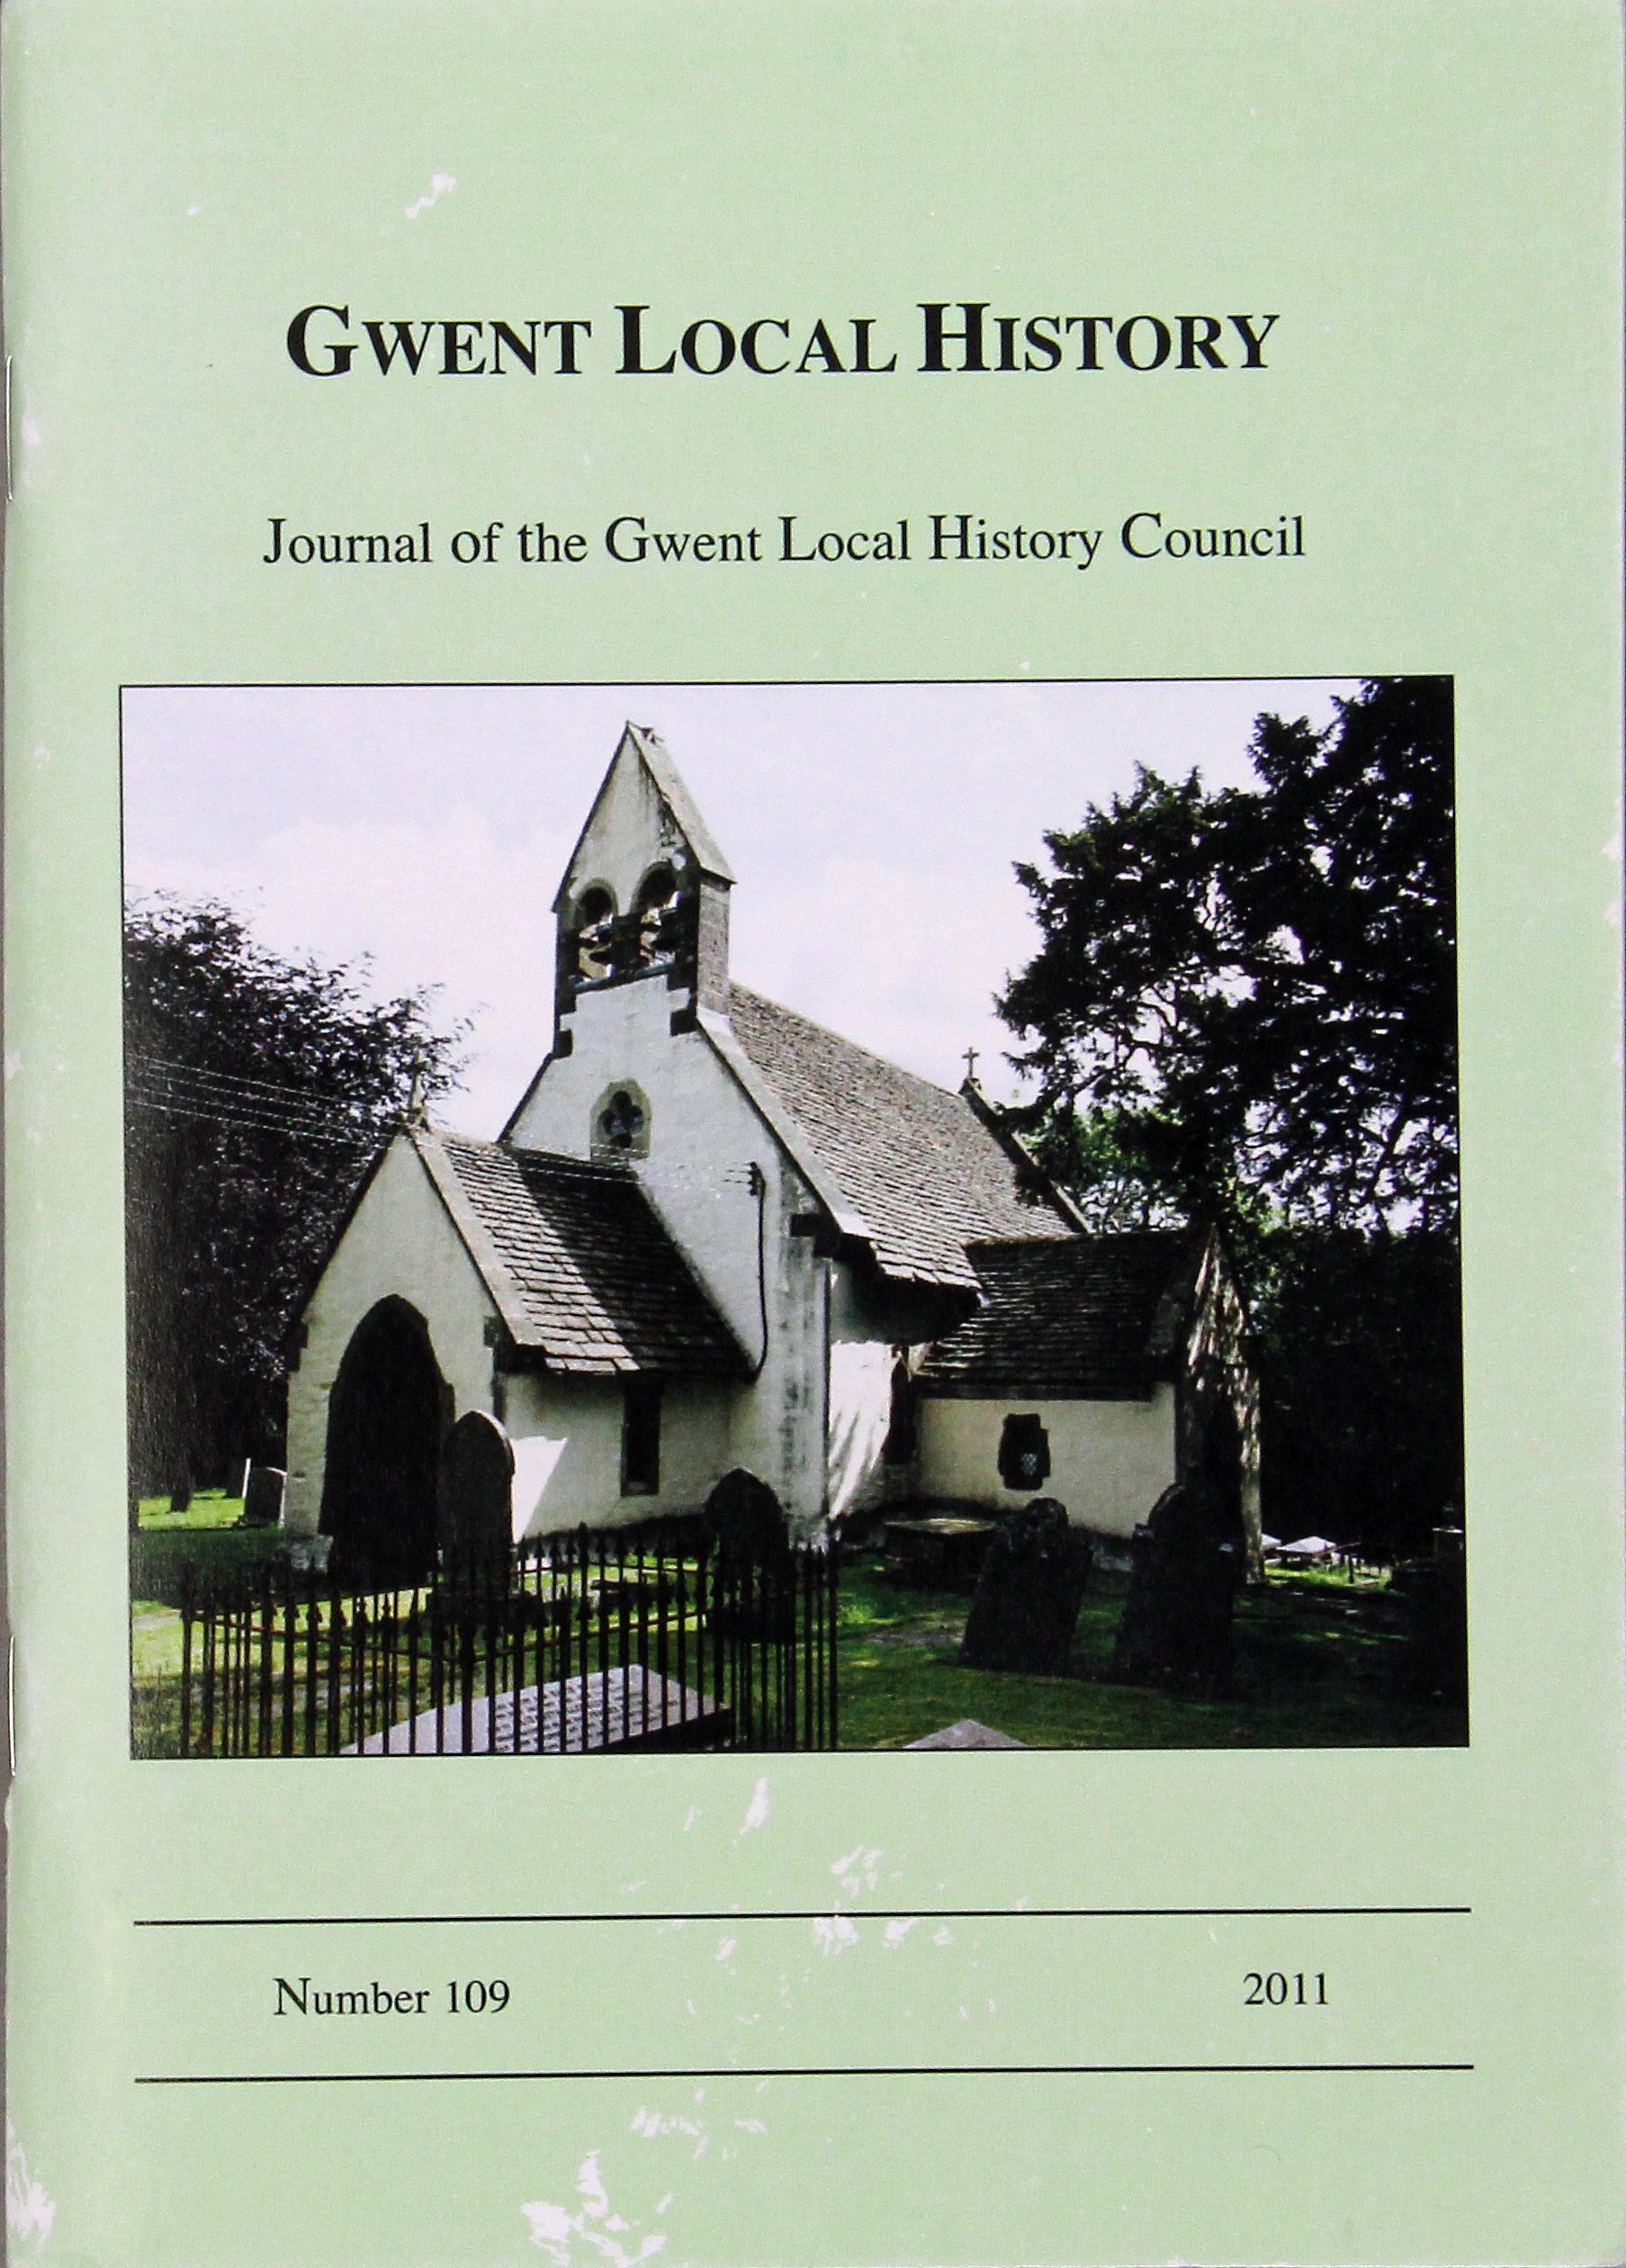 Gwent Local History: Journal of the Gwent Local History Council No.109, 2011, £2.00